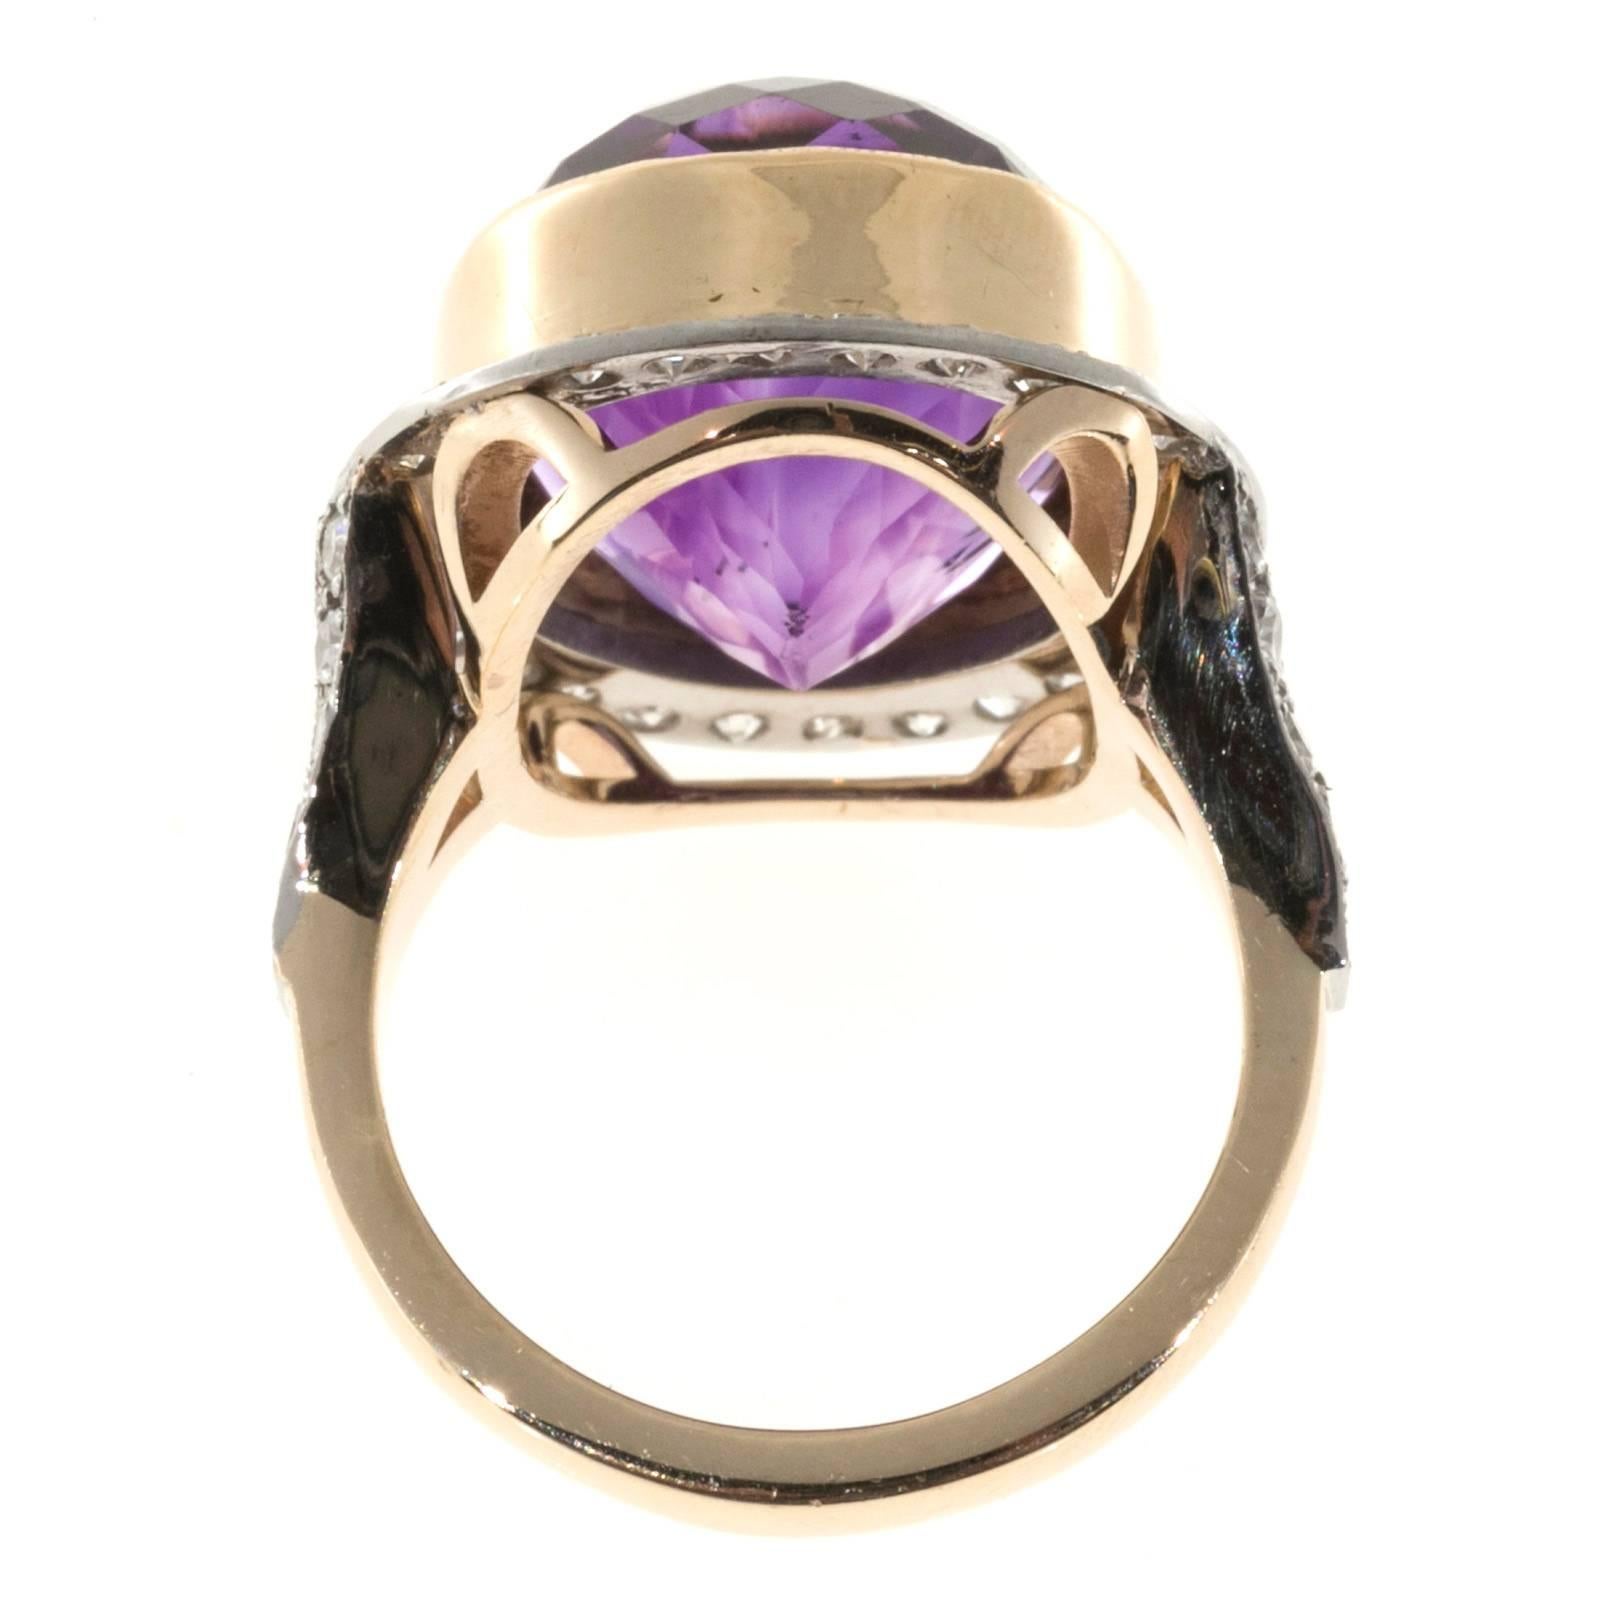 Victorian 1890 to 1900 handmade 14k soft Rose gold Platinum topped ring with single cut diamonds and purple natural Amethyst.

1 oval gem old European cut bright slightly reddish purple Amethyst, approx. total weight 10.00cts, H, VS-SI, 16.5 x